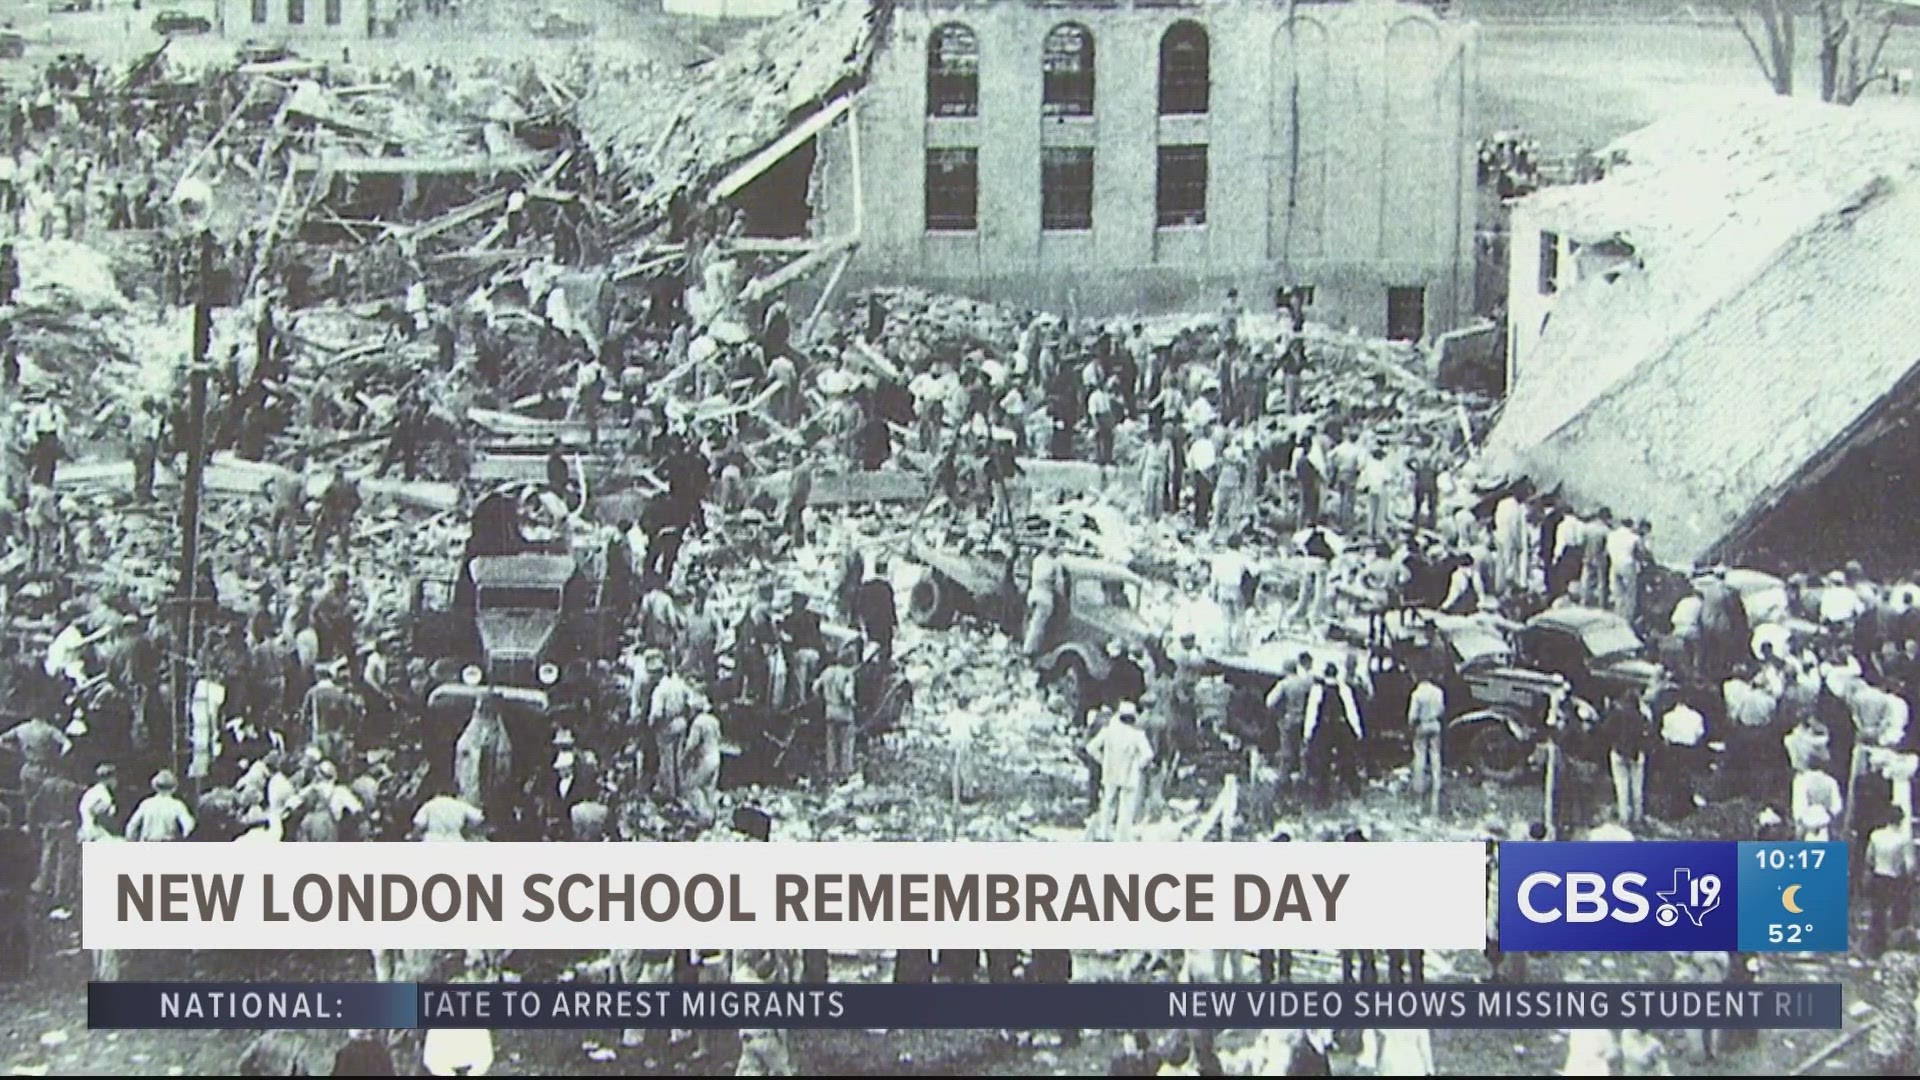 Smith County commissioners issue proclamation to honor memory of New London 1937 school explosion